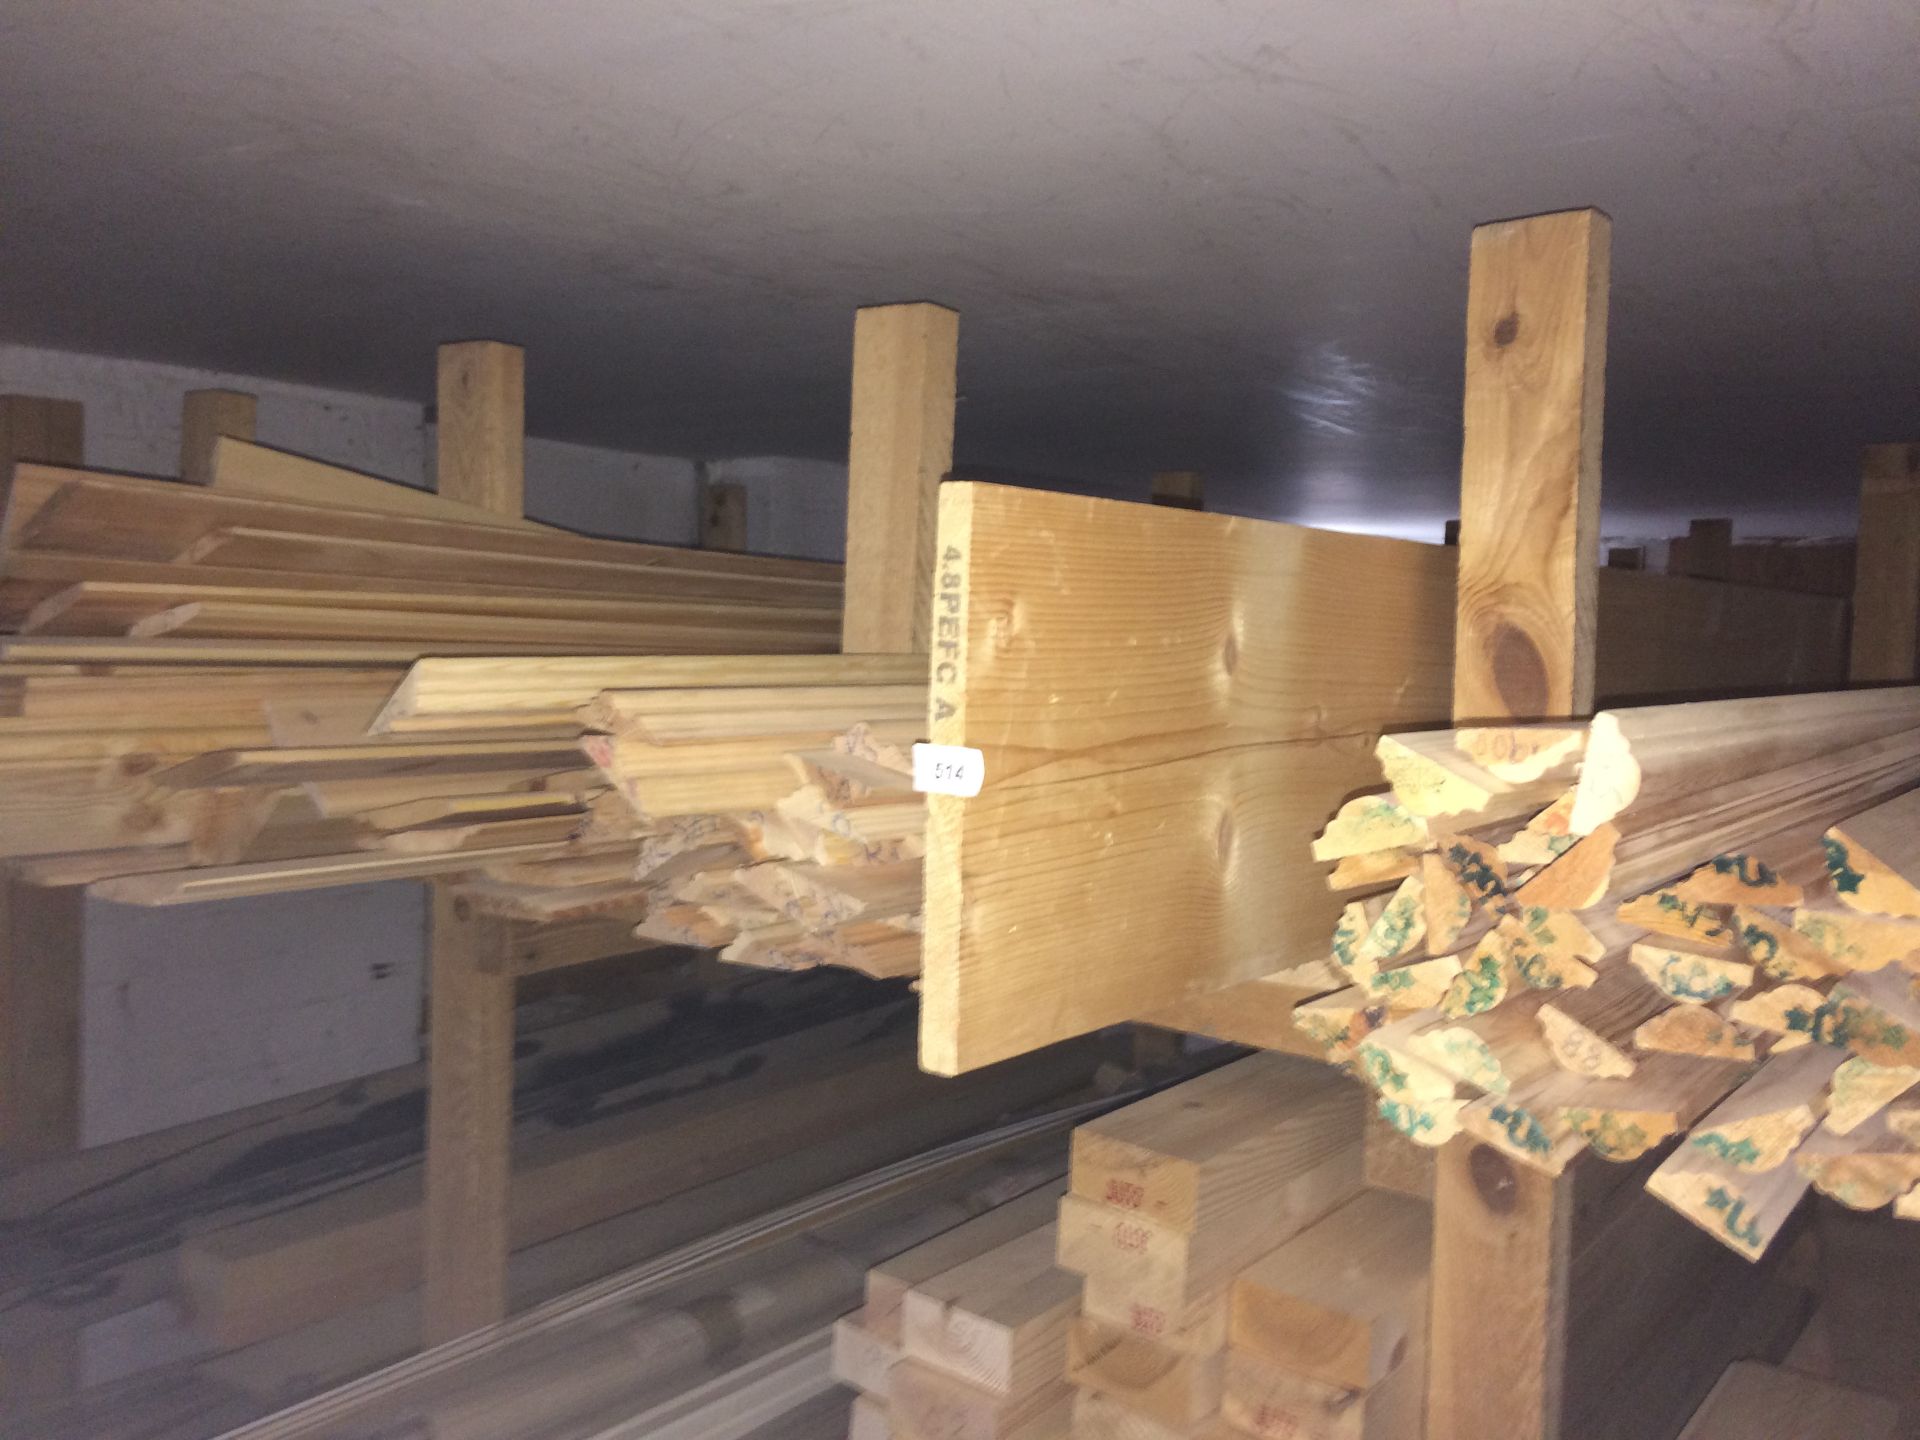 Contents to shelf - a quantity of wood picture rails,